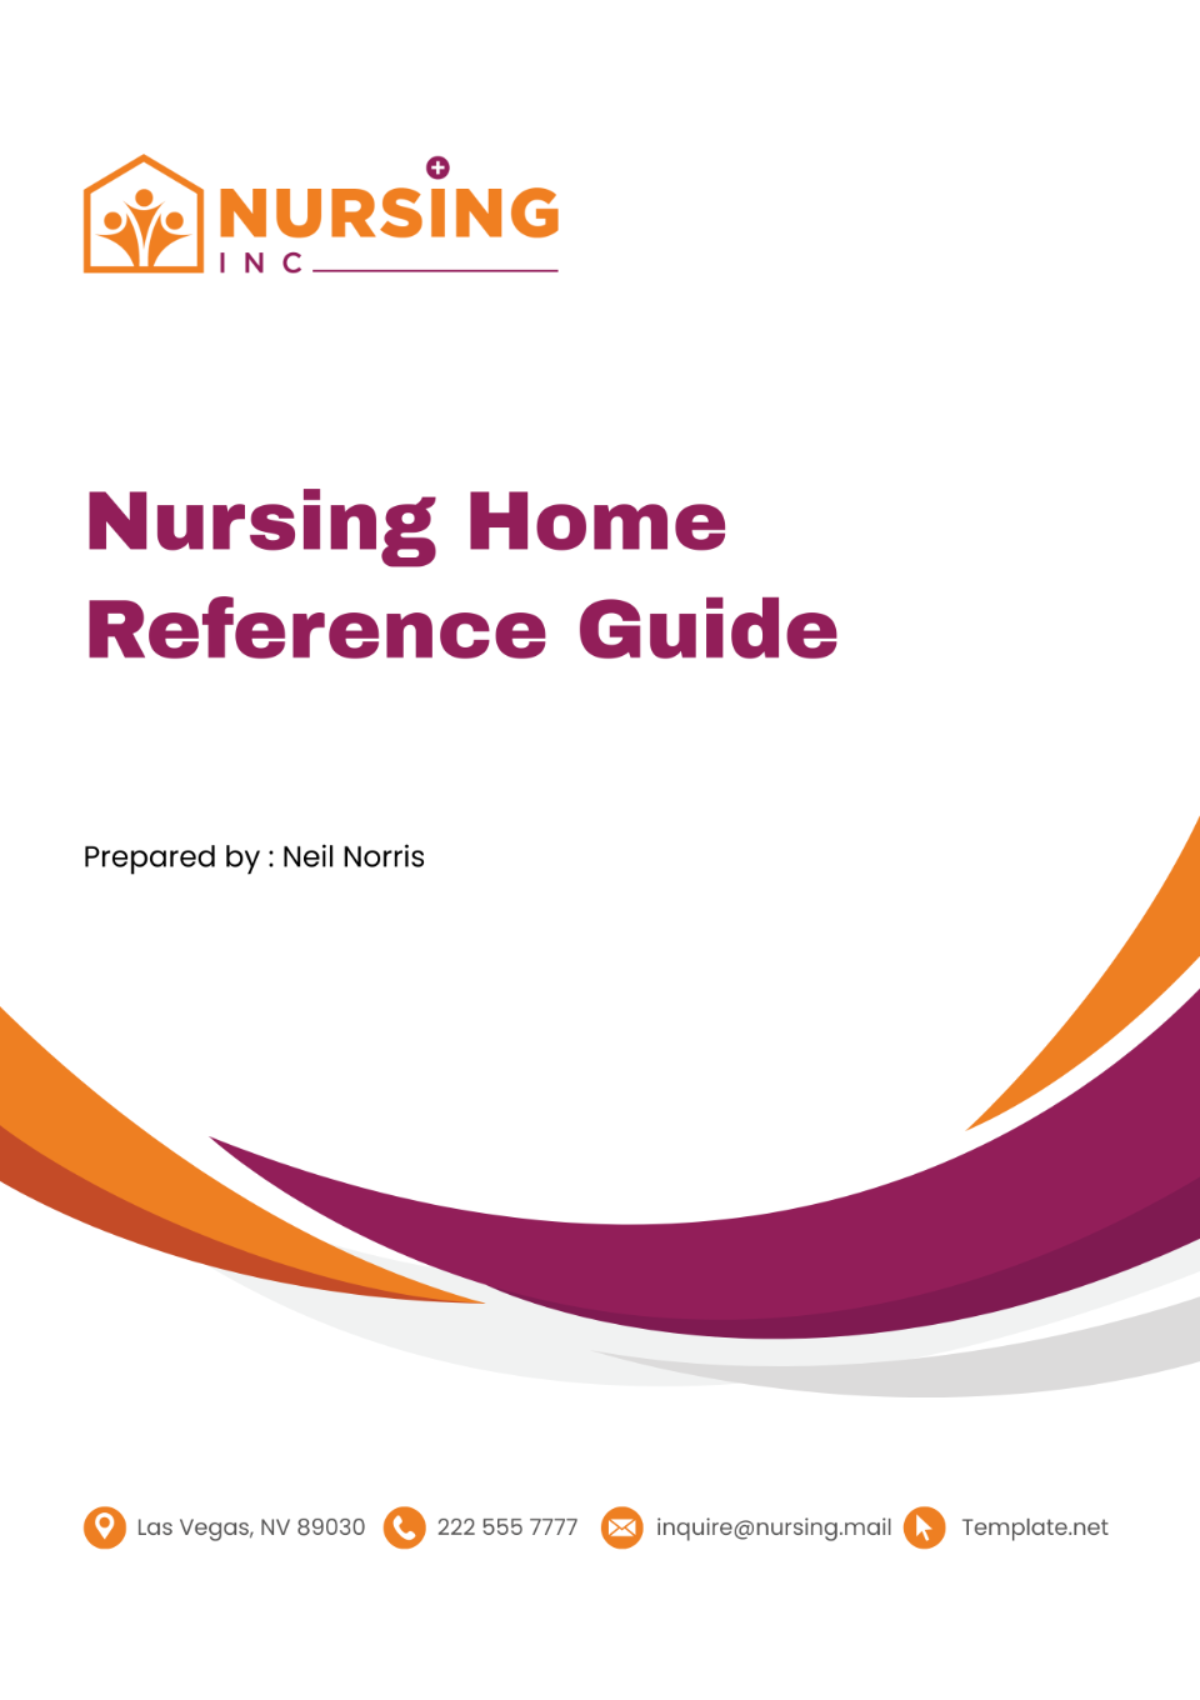 Nursing Home Reference Guide Template